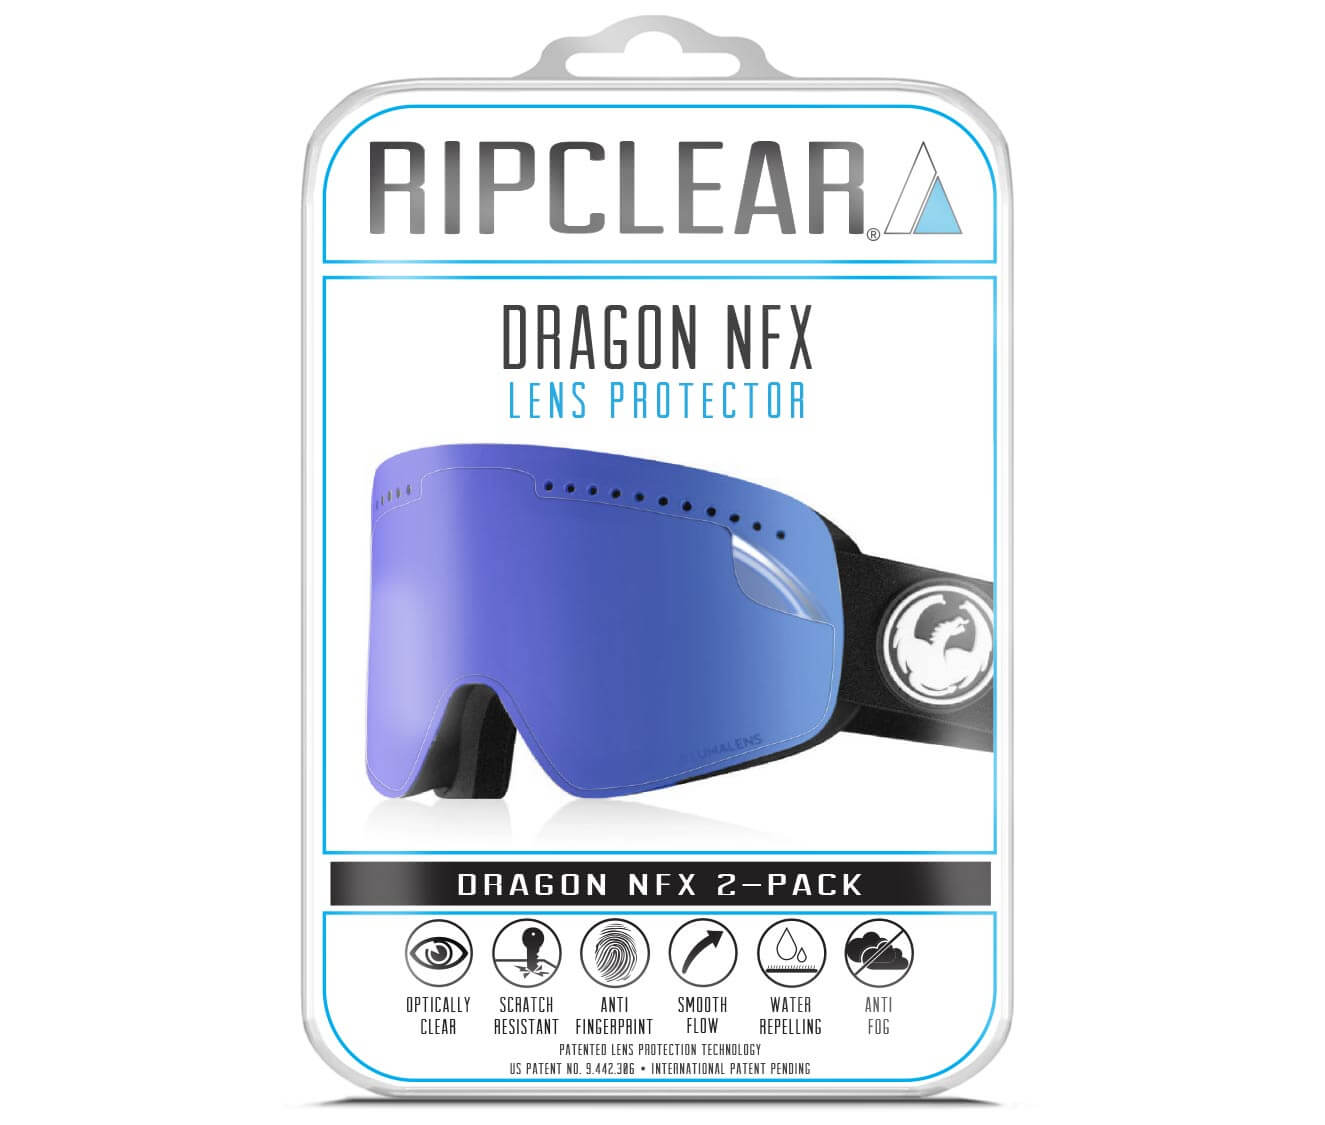 Ripclear Dragon NFX Snow Goggle Lens Protector - 2 Pack